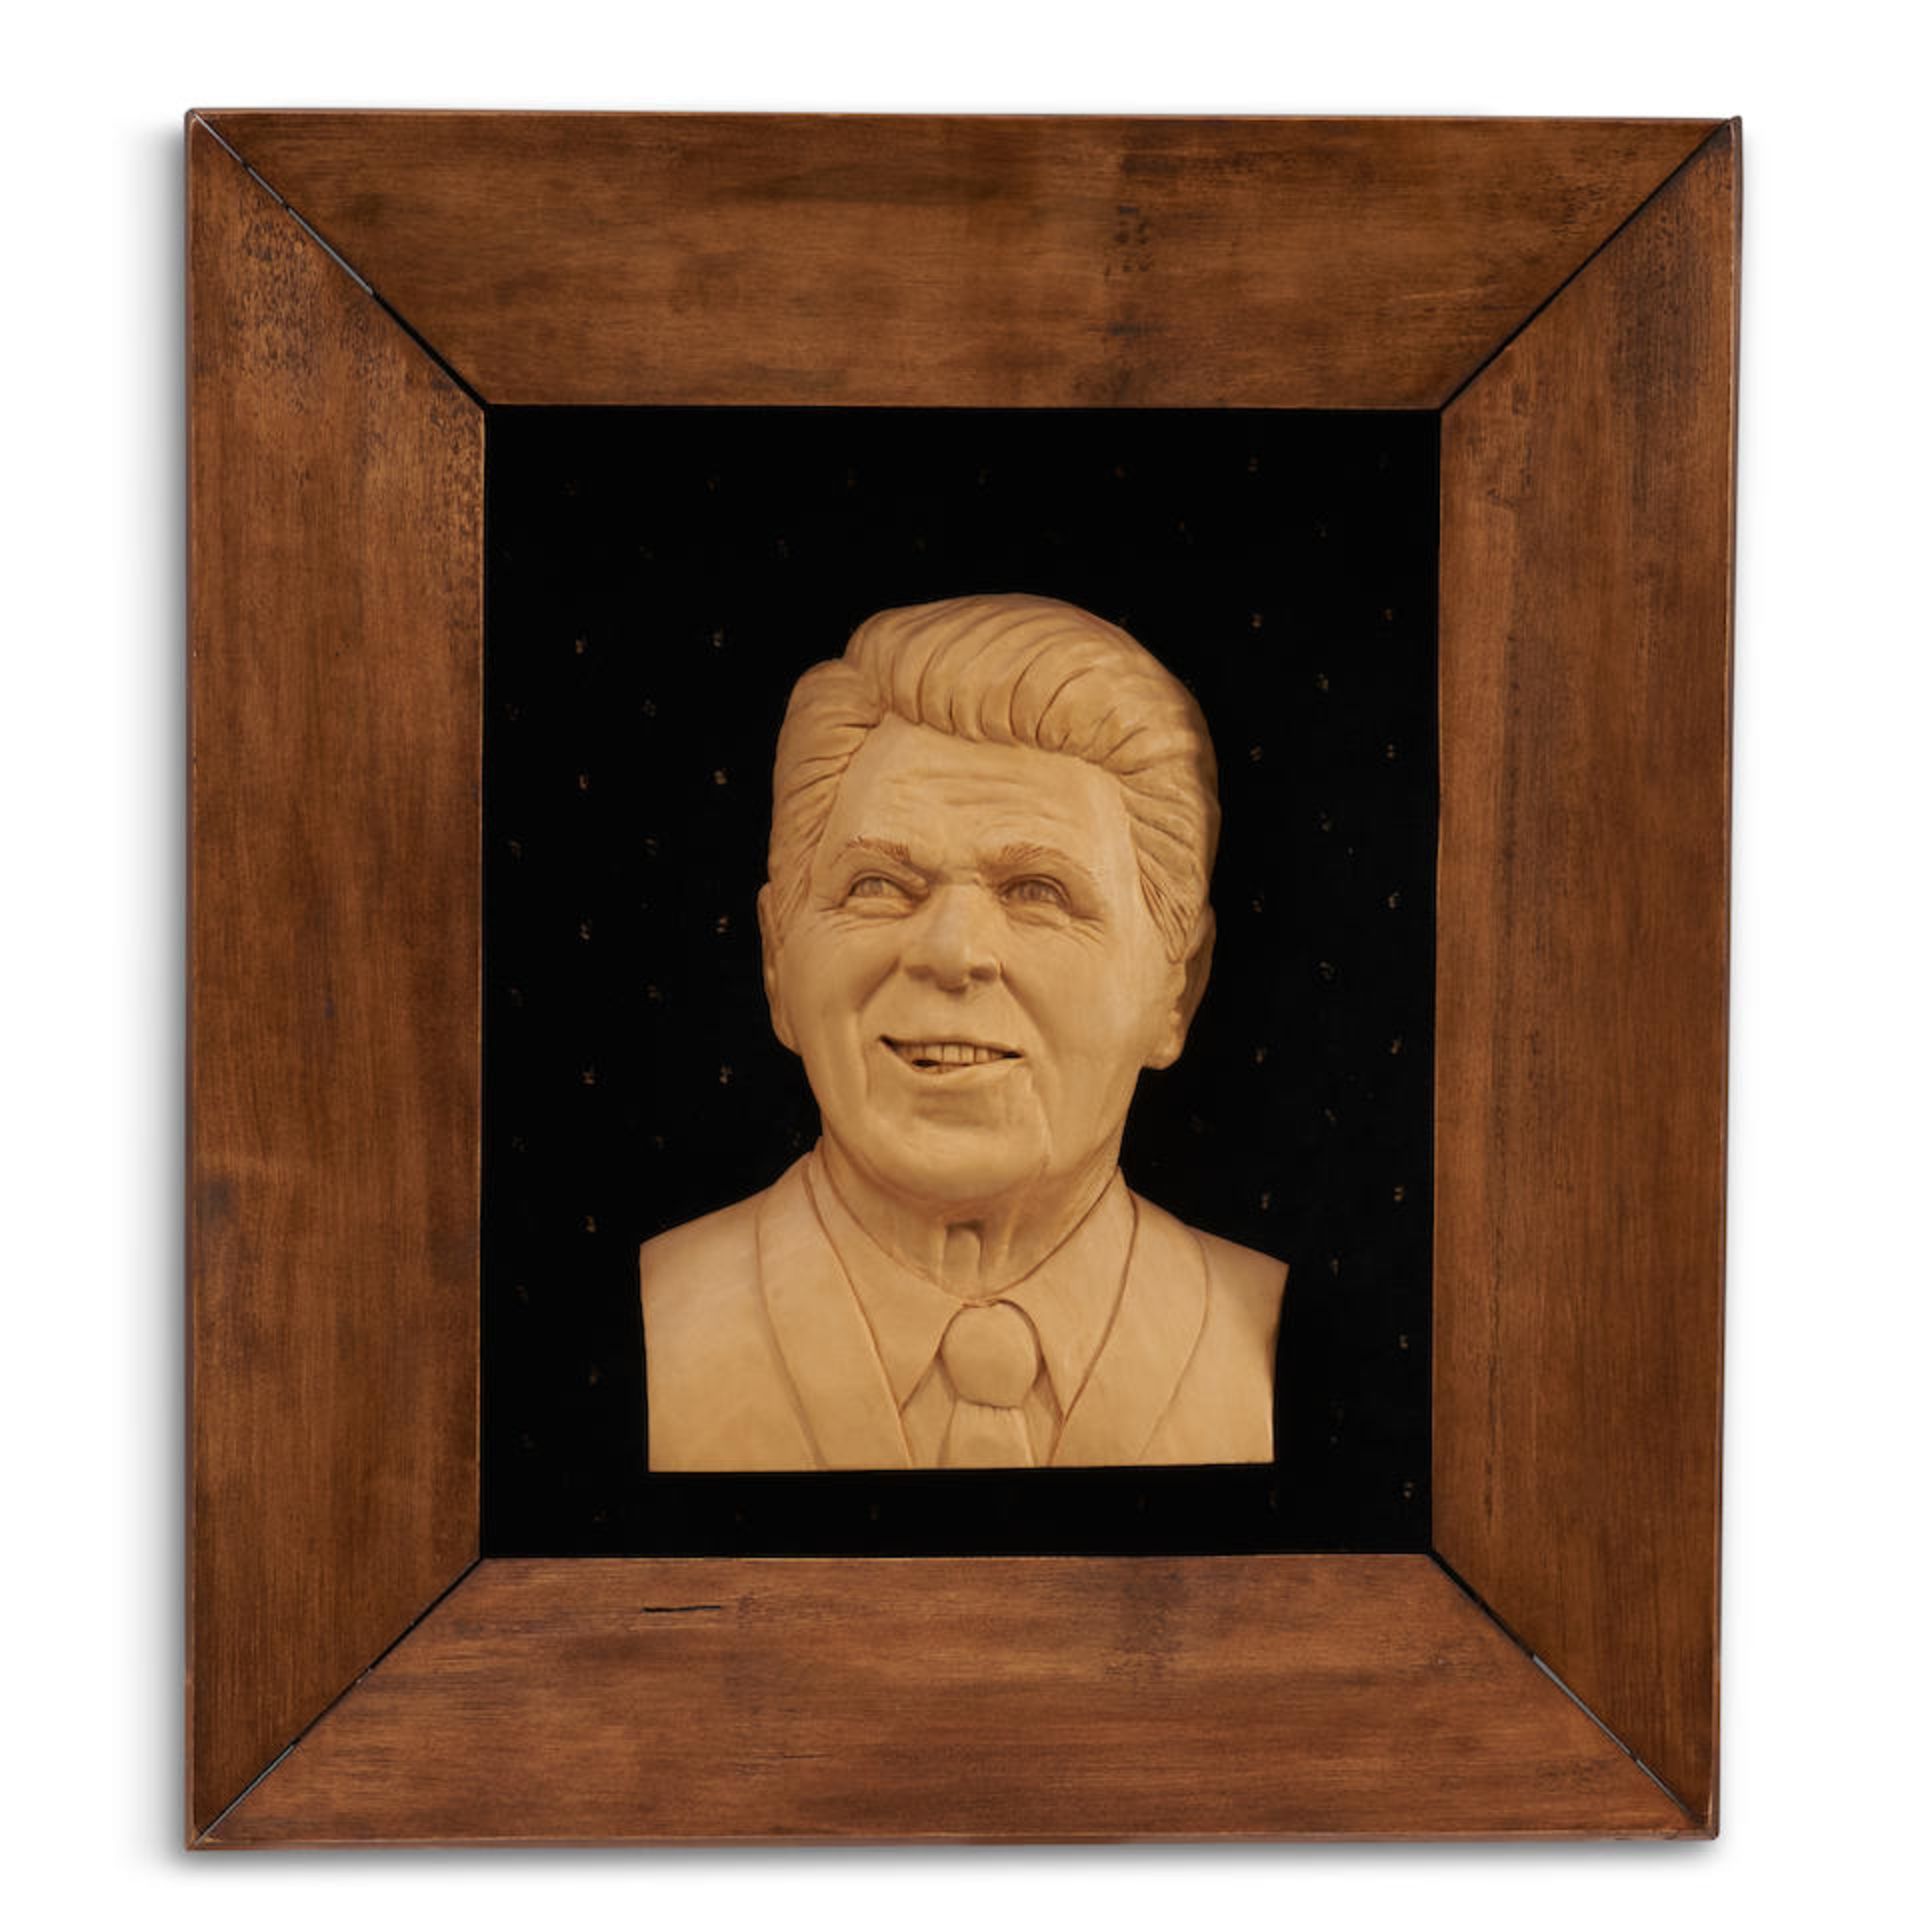 Framed Relief Portrait of Ronald Reagan, Carolyn Campbell (b. 1947), Knoxville, Tennessee, 1995.